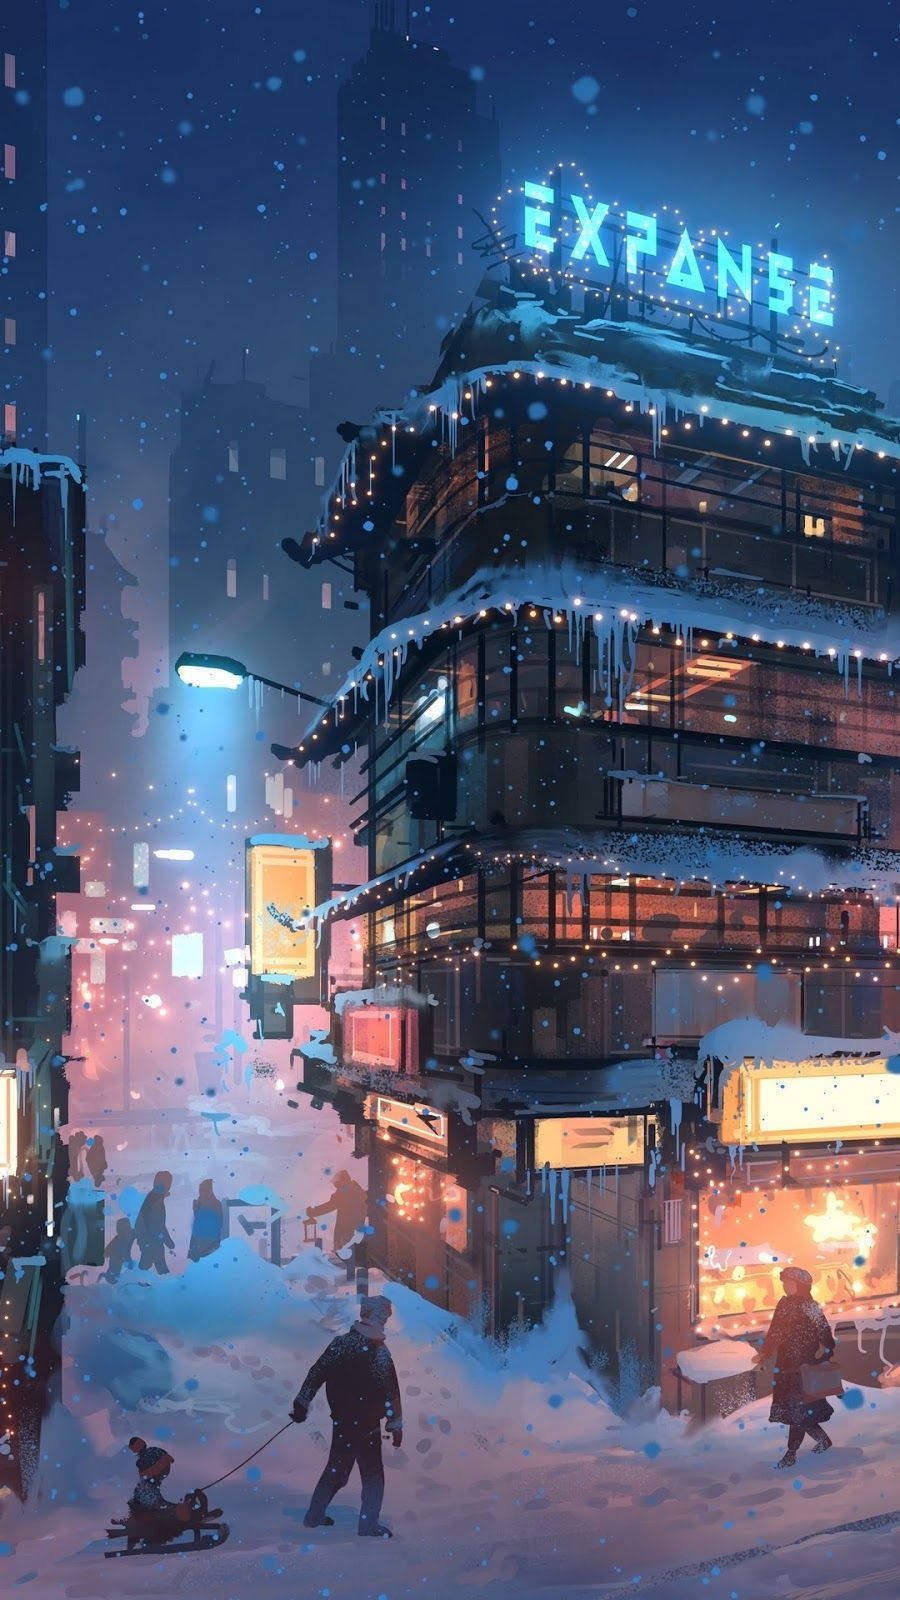 Download Aesthetic Anime Expanse Building In Winter Phone Wallpaper